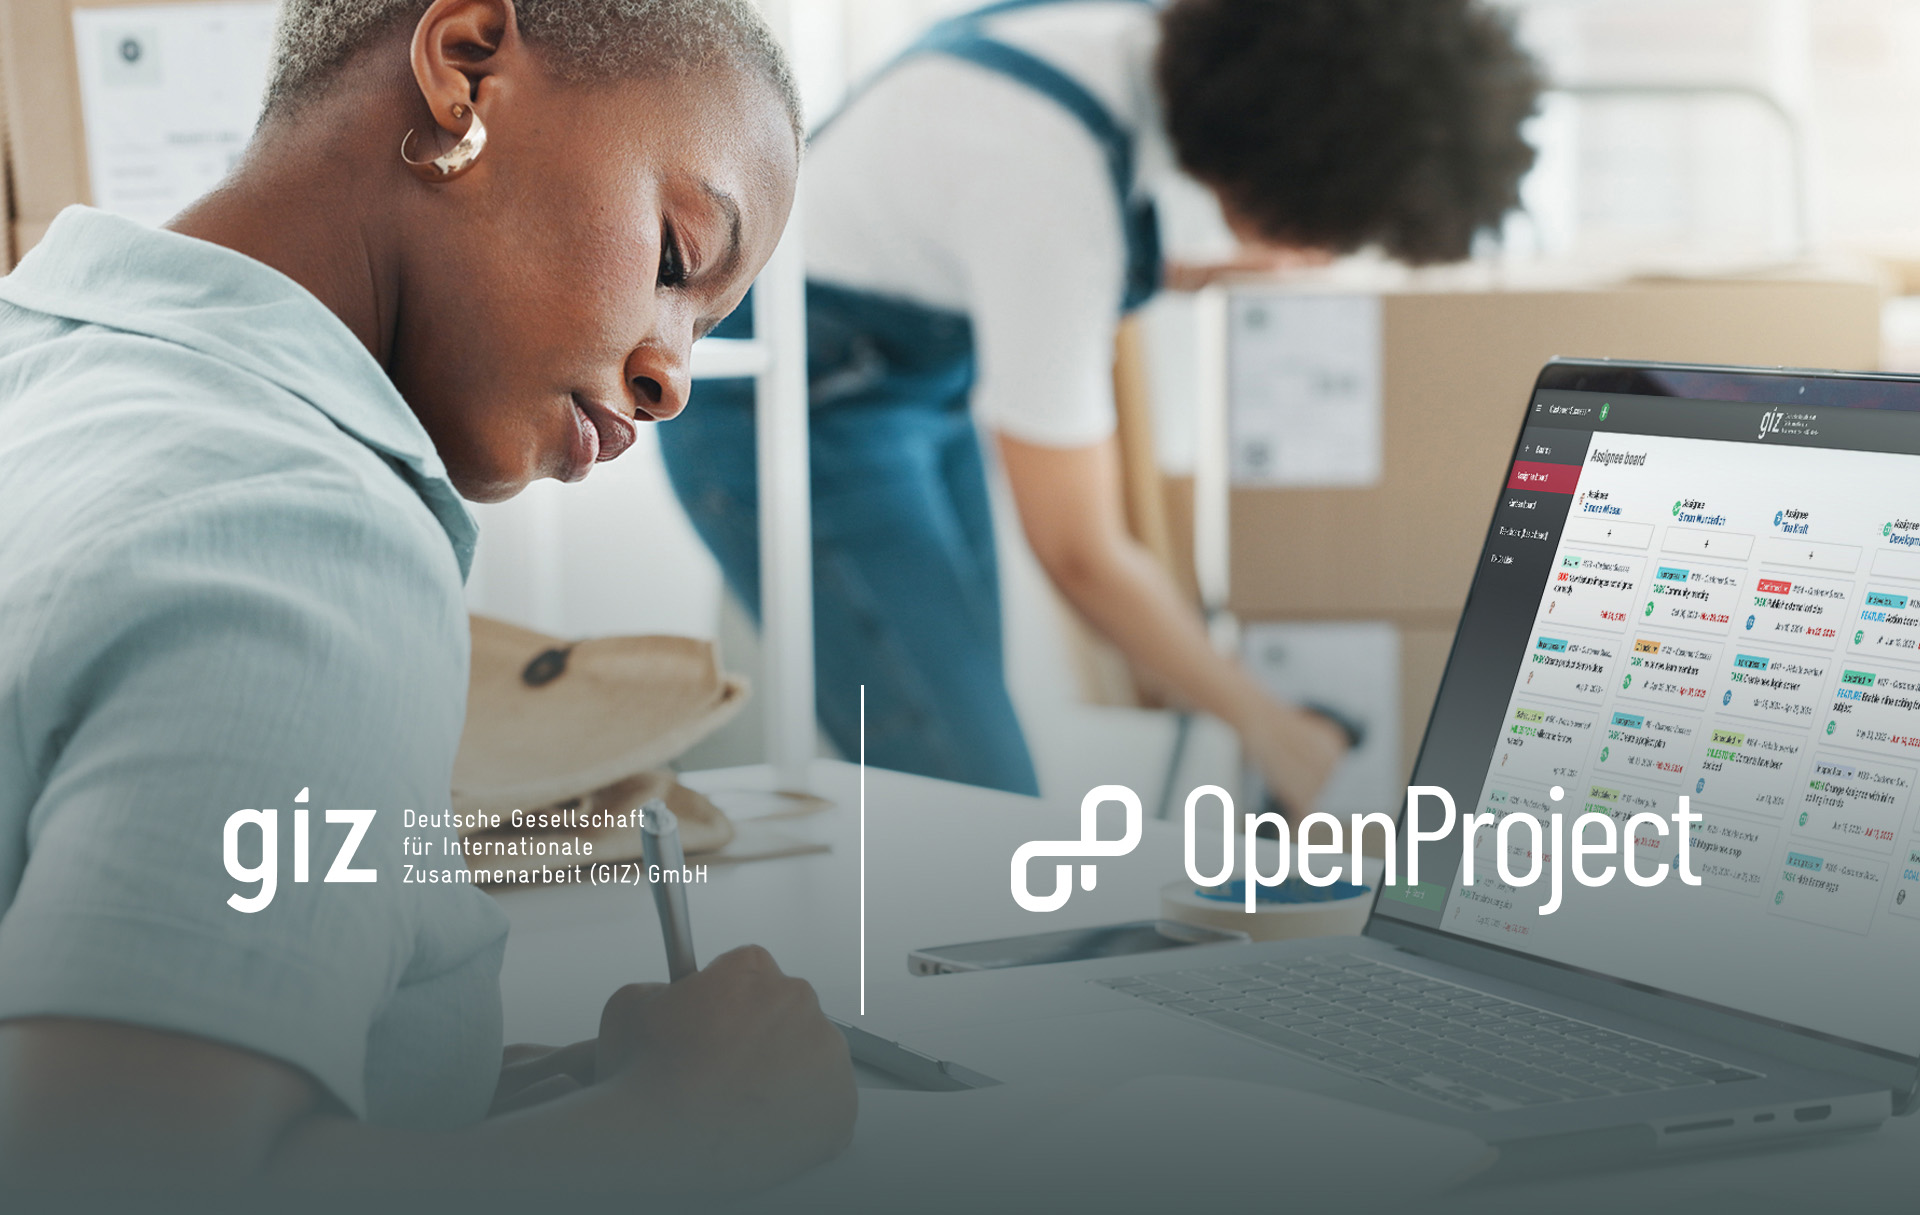 Making a difference with technology: How GIZ uses OpenProject for development in Rwanda